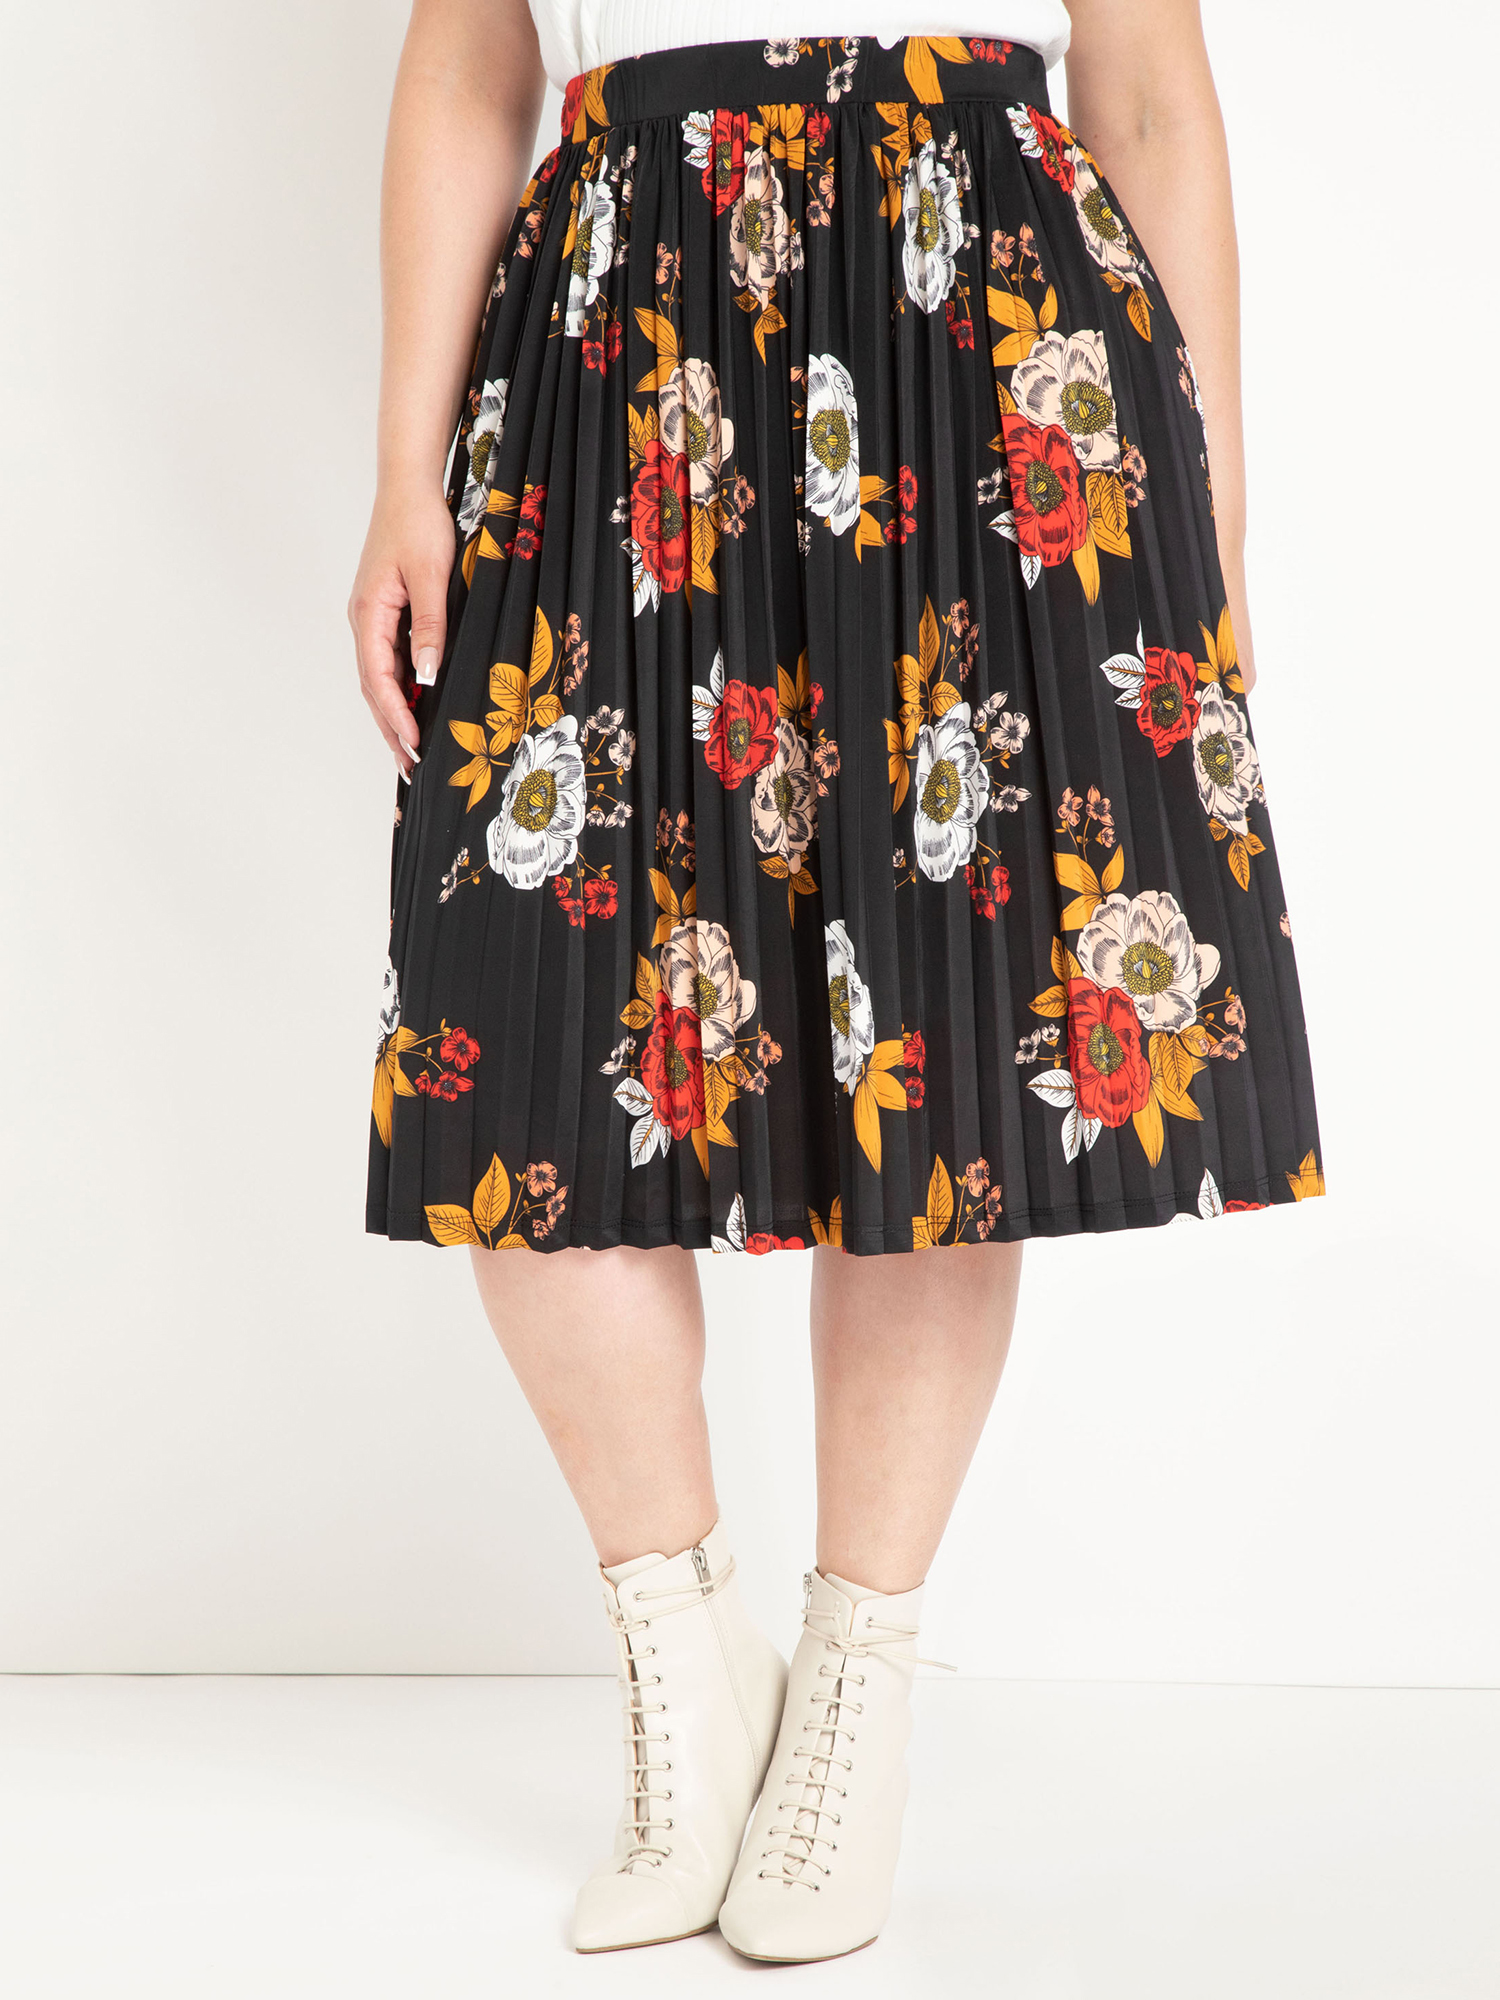 ELOQUII Elements Women's Plus Size Multi Floral Pleated Midi Skirt - image 1 of 3